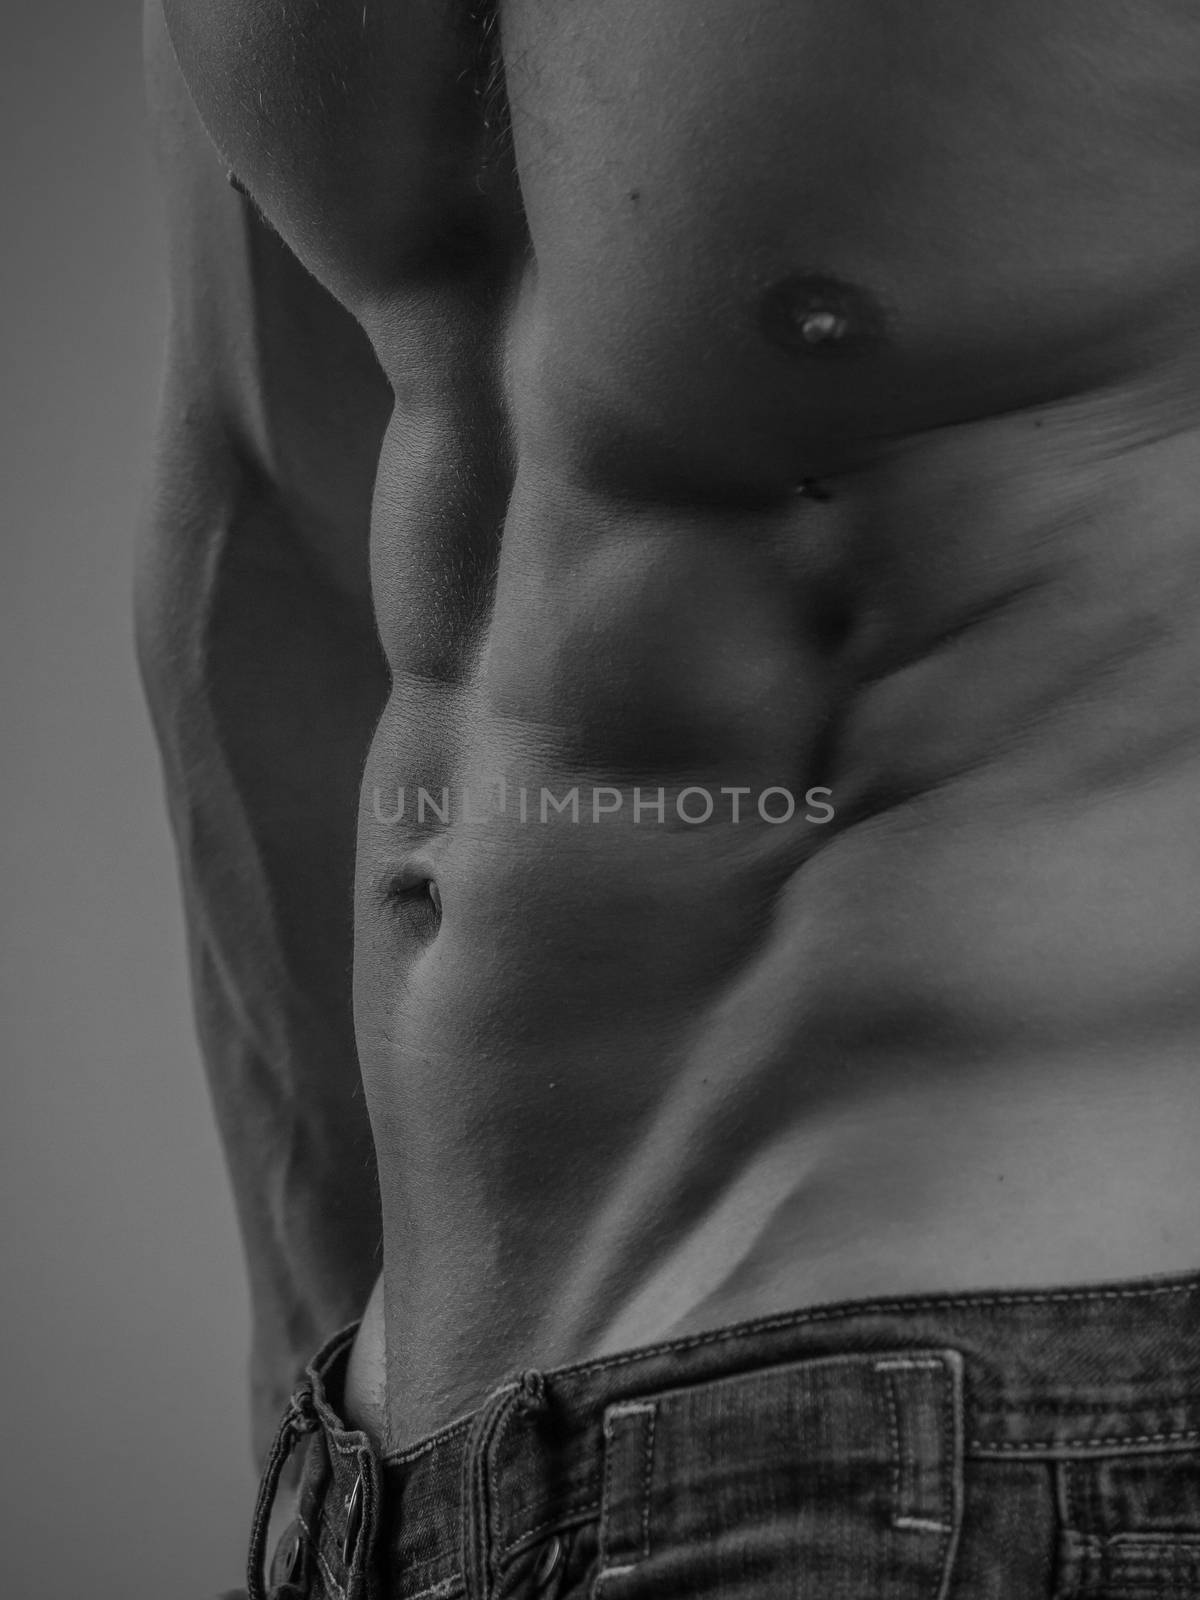 Perfectly fit shirtless young man by Alex_L